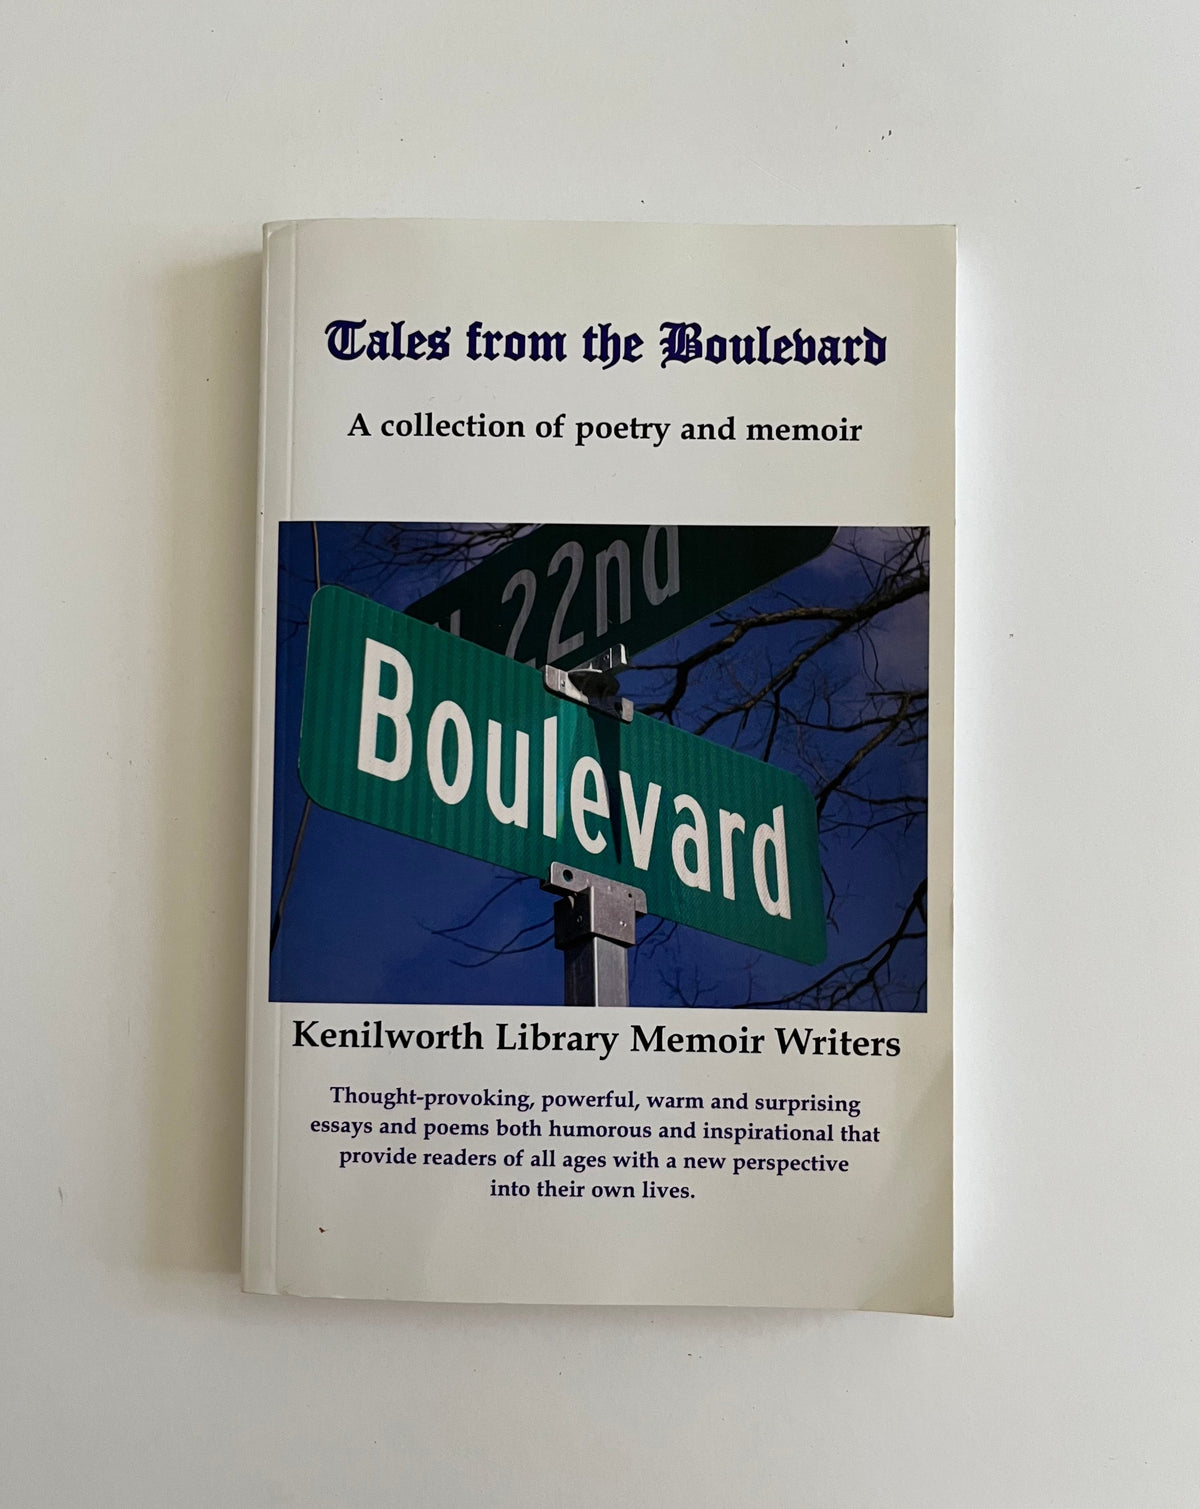 Donate: Tales from the Boulevard: A collection of Poetry and Memoir by the Kenilworth Library Memoir Writers